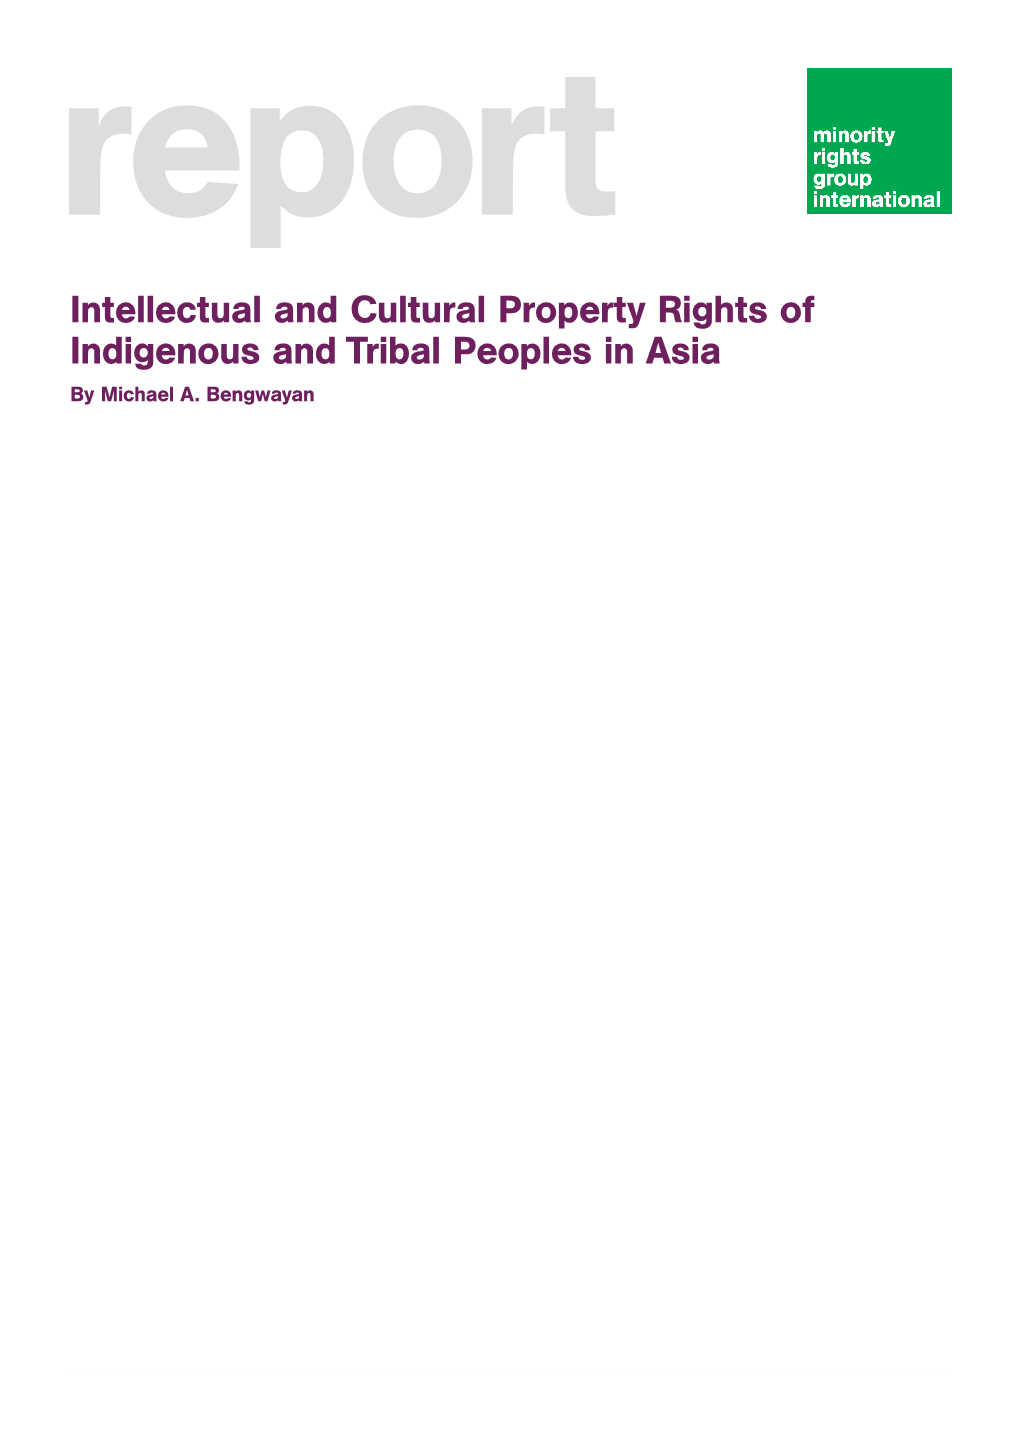 Intellectual and Cultural Property Rights of Indigenous and Tribal Peoples in Asia by Michael A